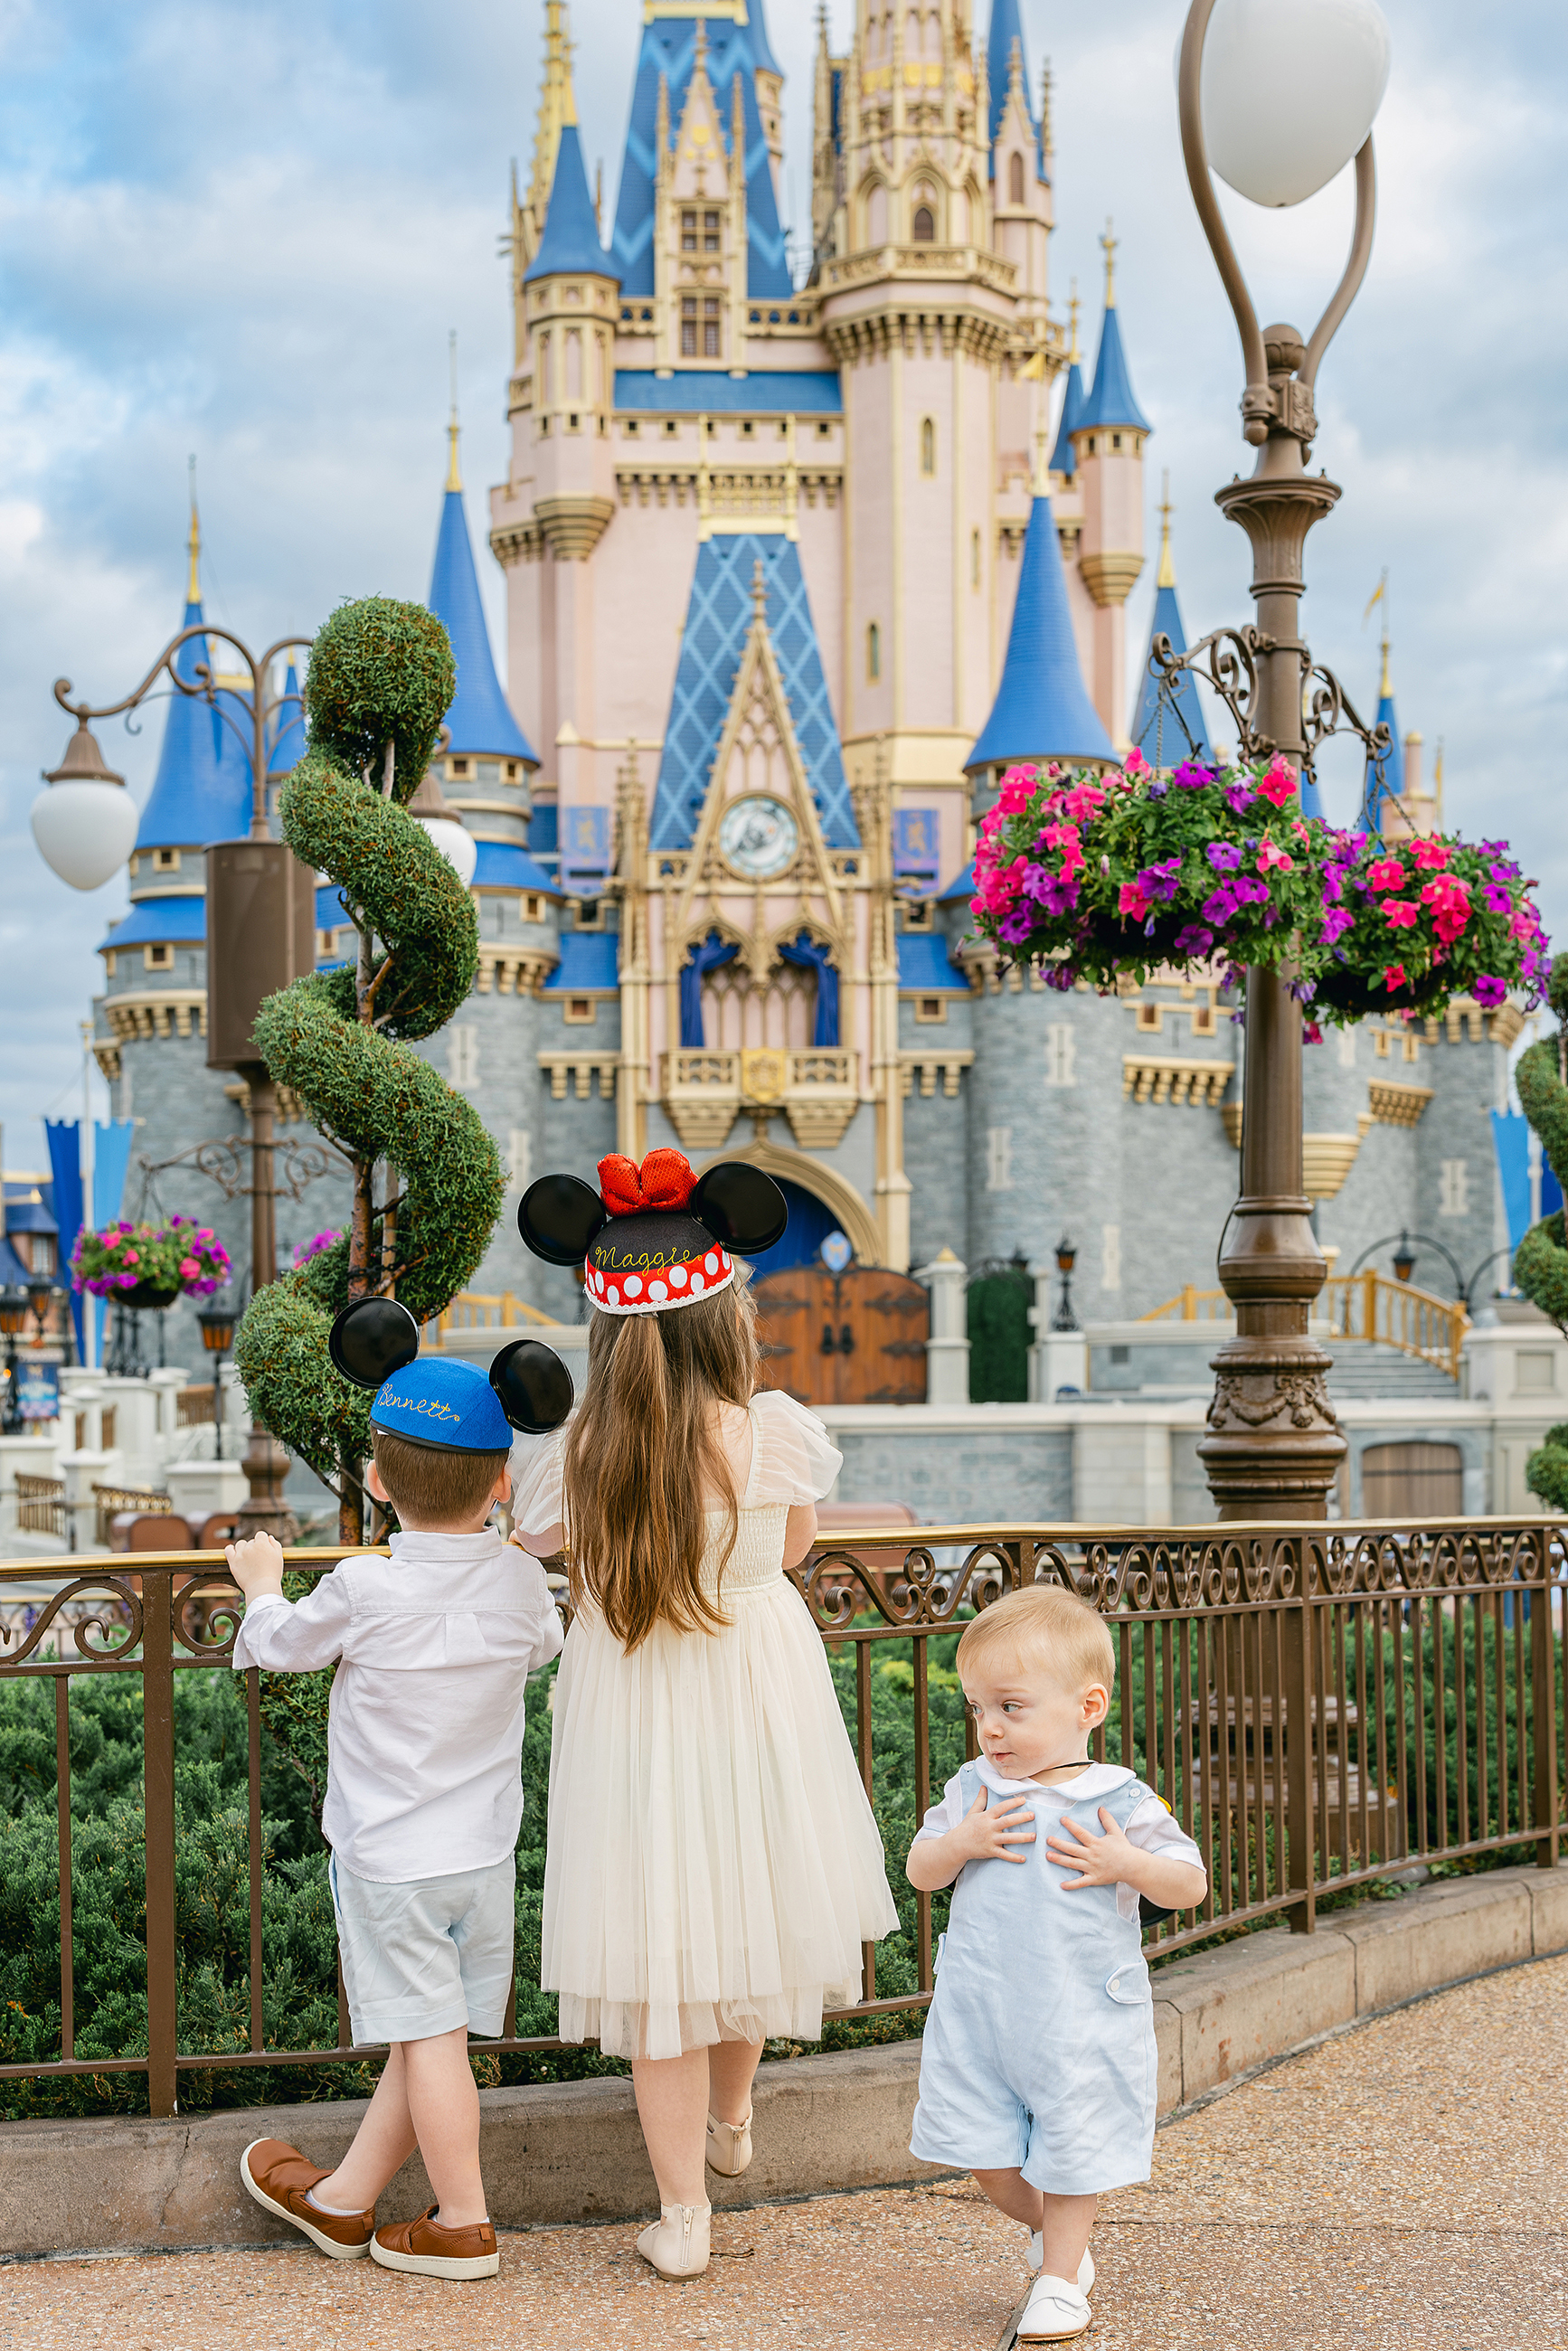 Three little children stand together in front of Cinderella's Castle at the Magic Kingdom.